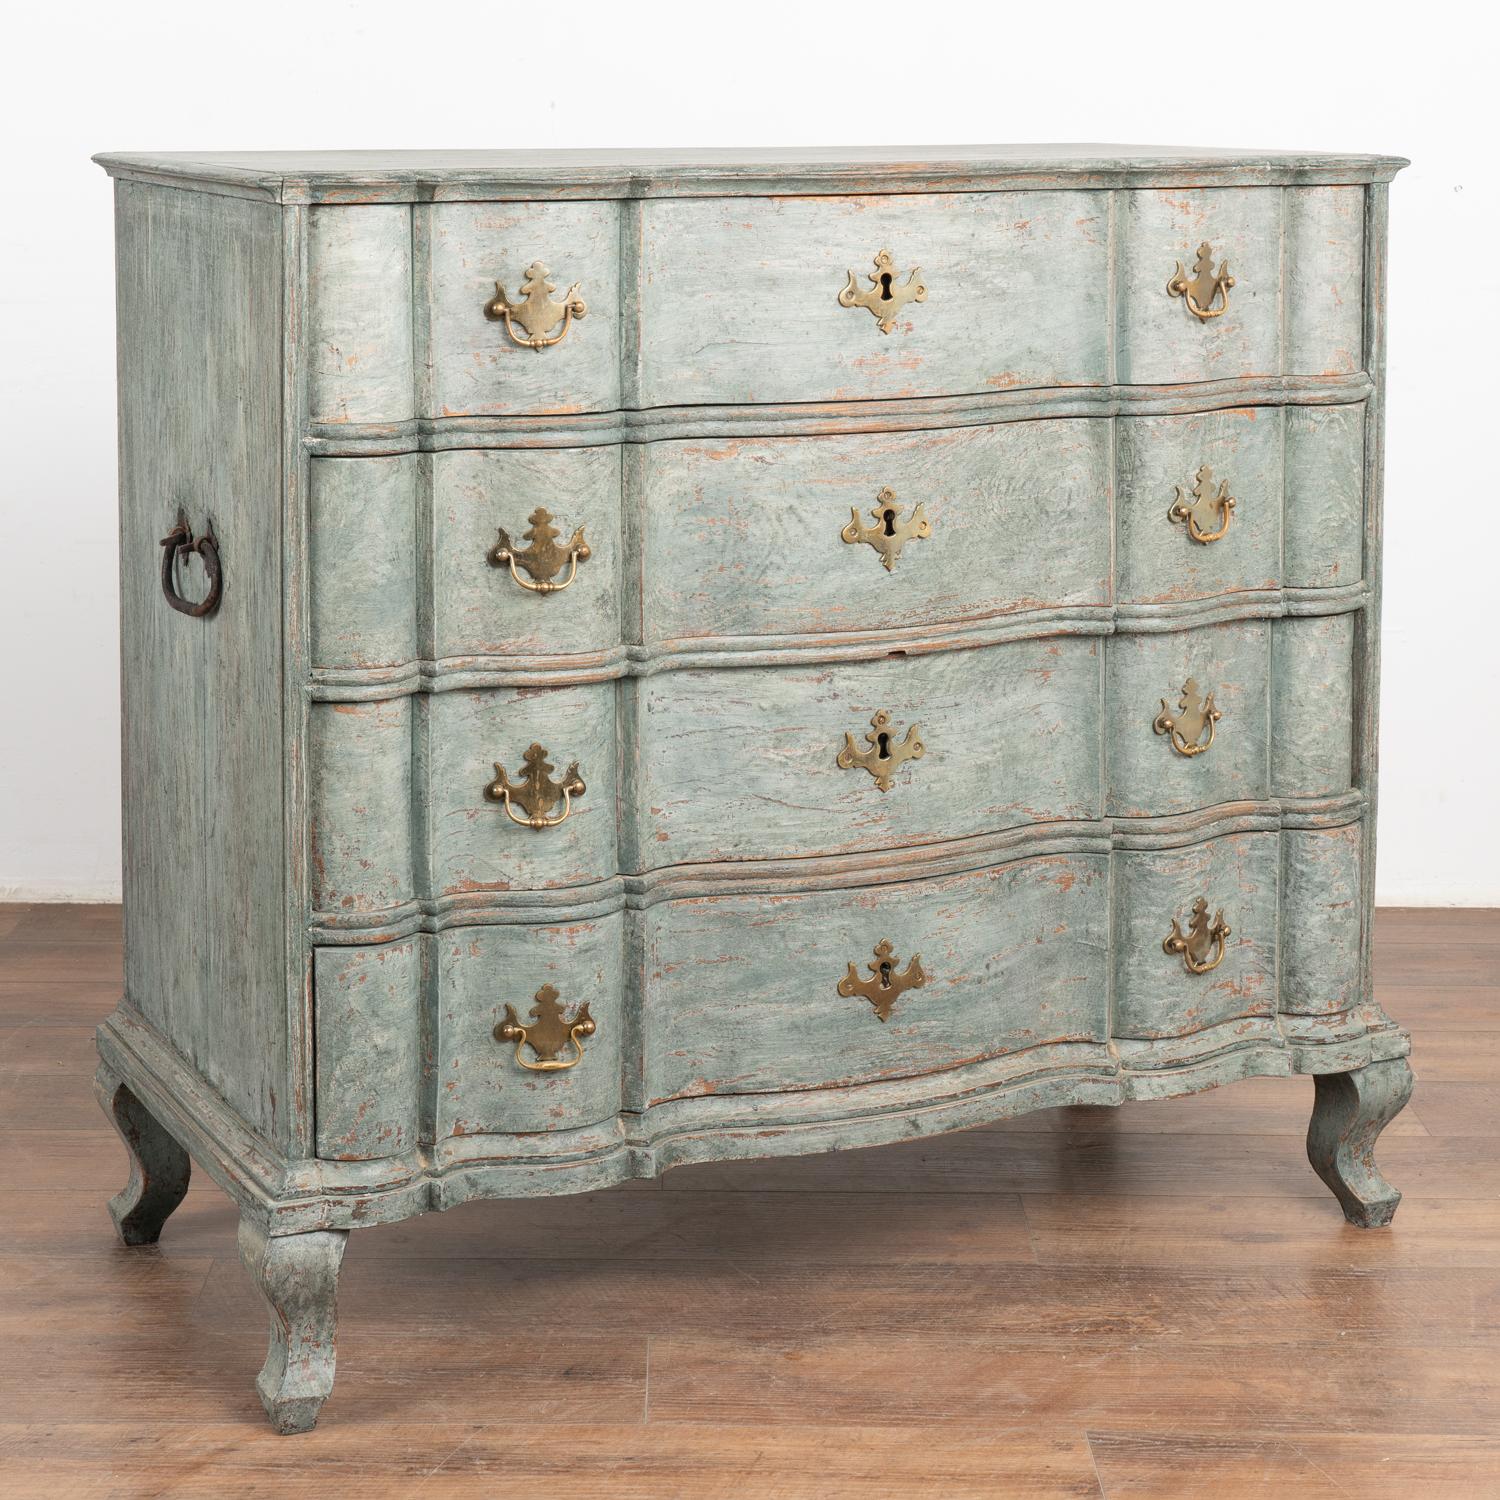 This large antique rococo oak chest of drawers features a serpentine front, handsome brass hardware pulls and rests on cabriolet feet.
It has been given an exceptional new professional seafoam blue/green layered painted finish and has been lightly